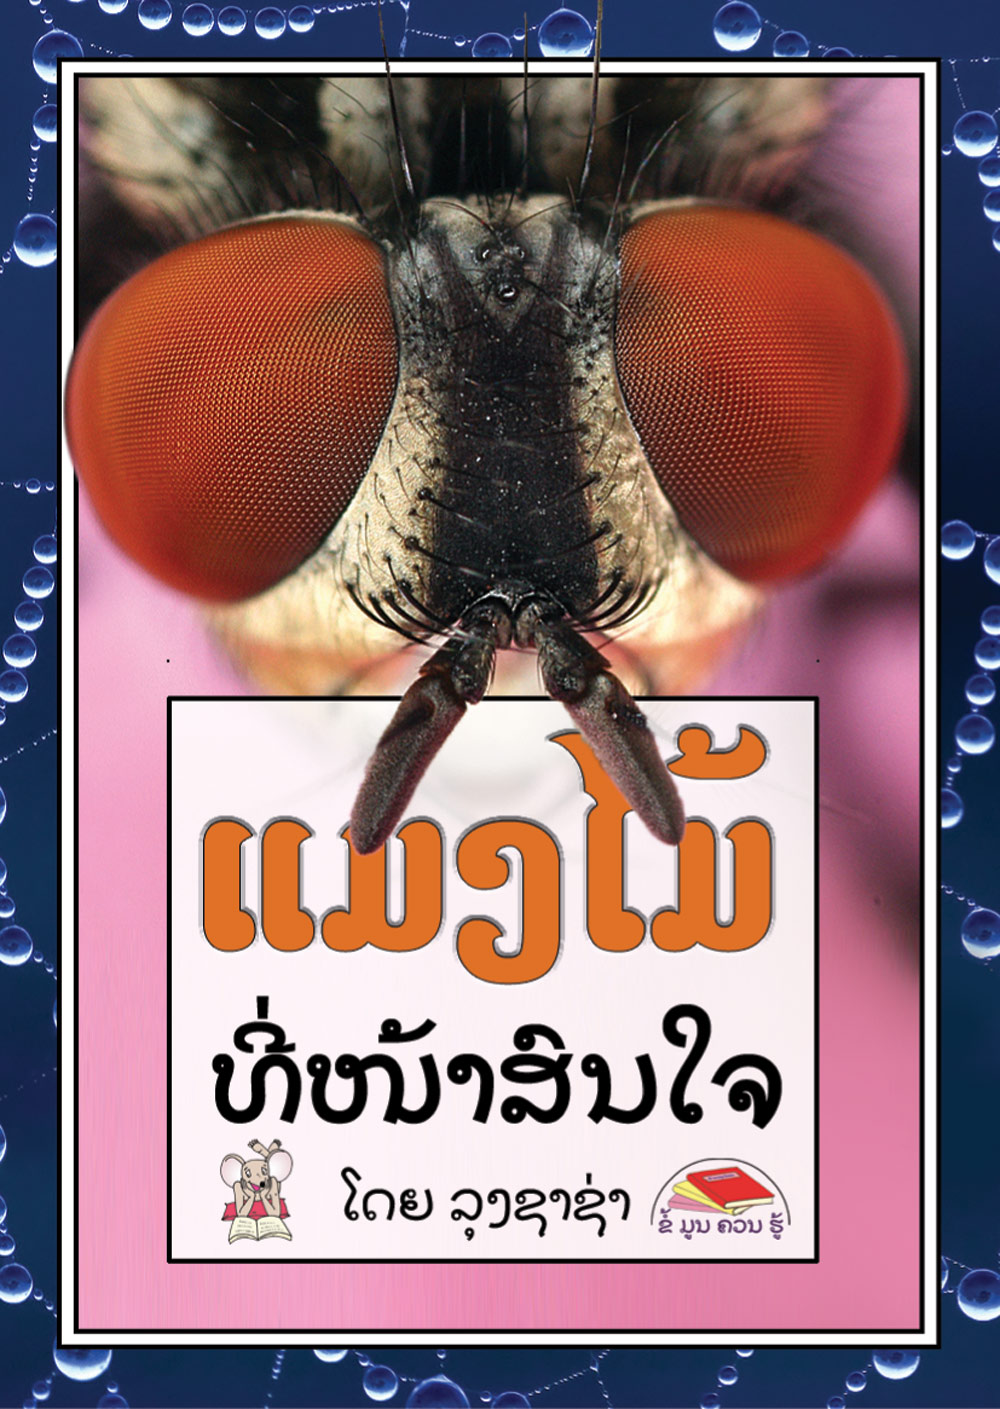 Insects are Fascinating large book cover, published in Lao language